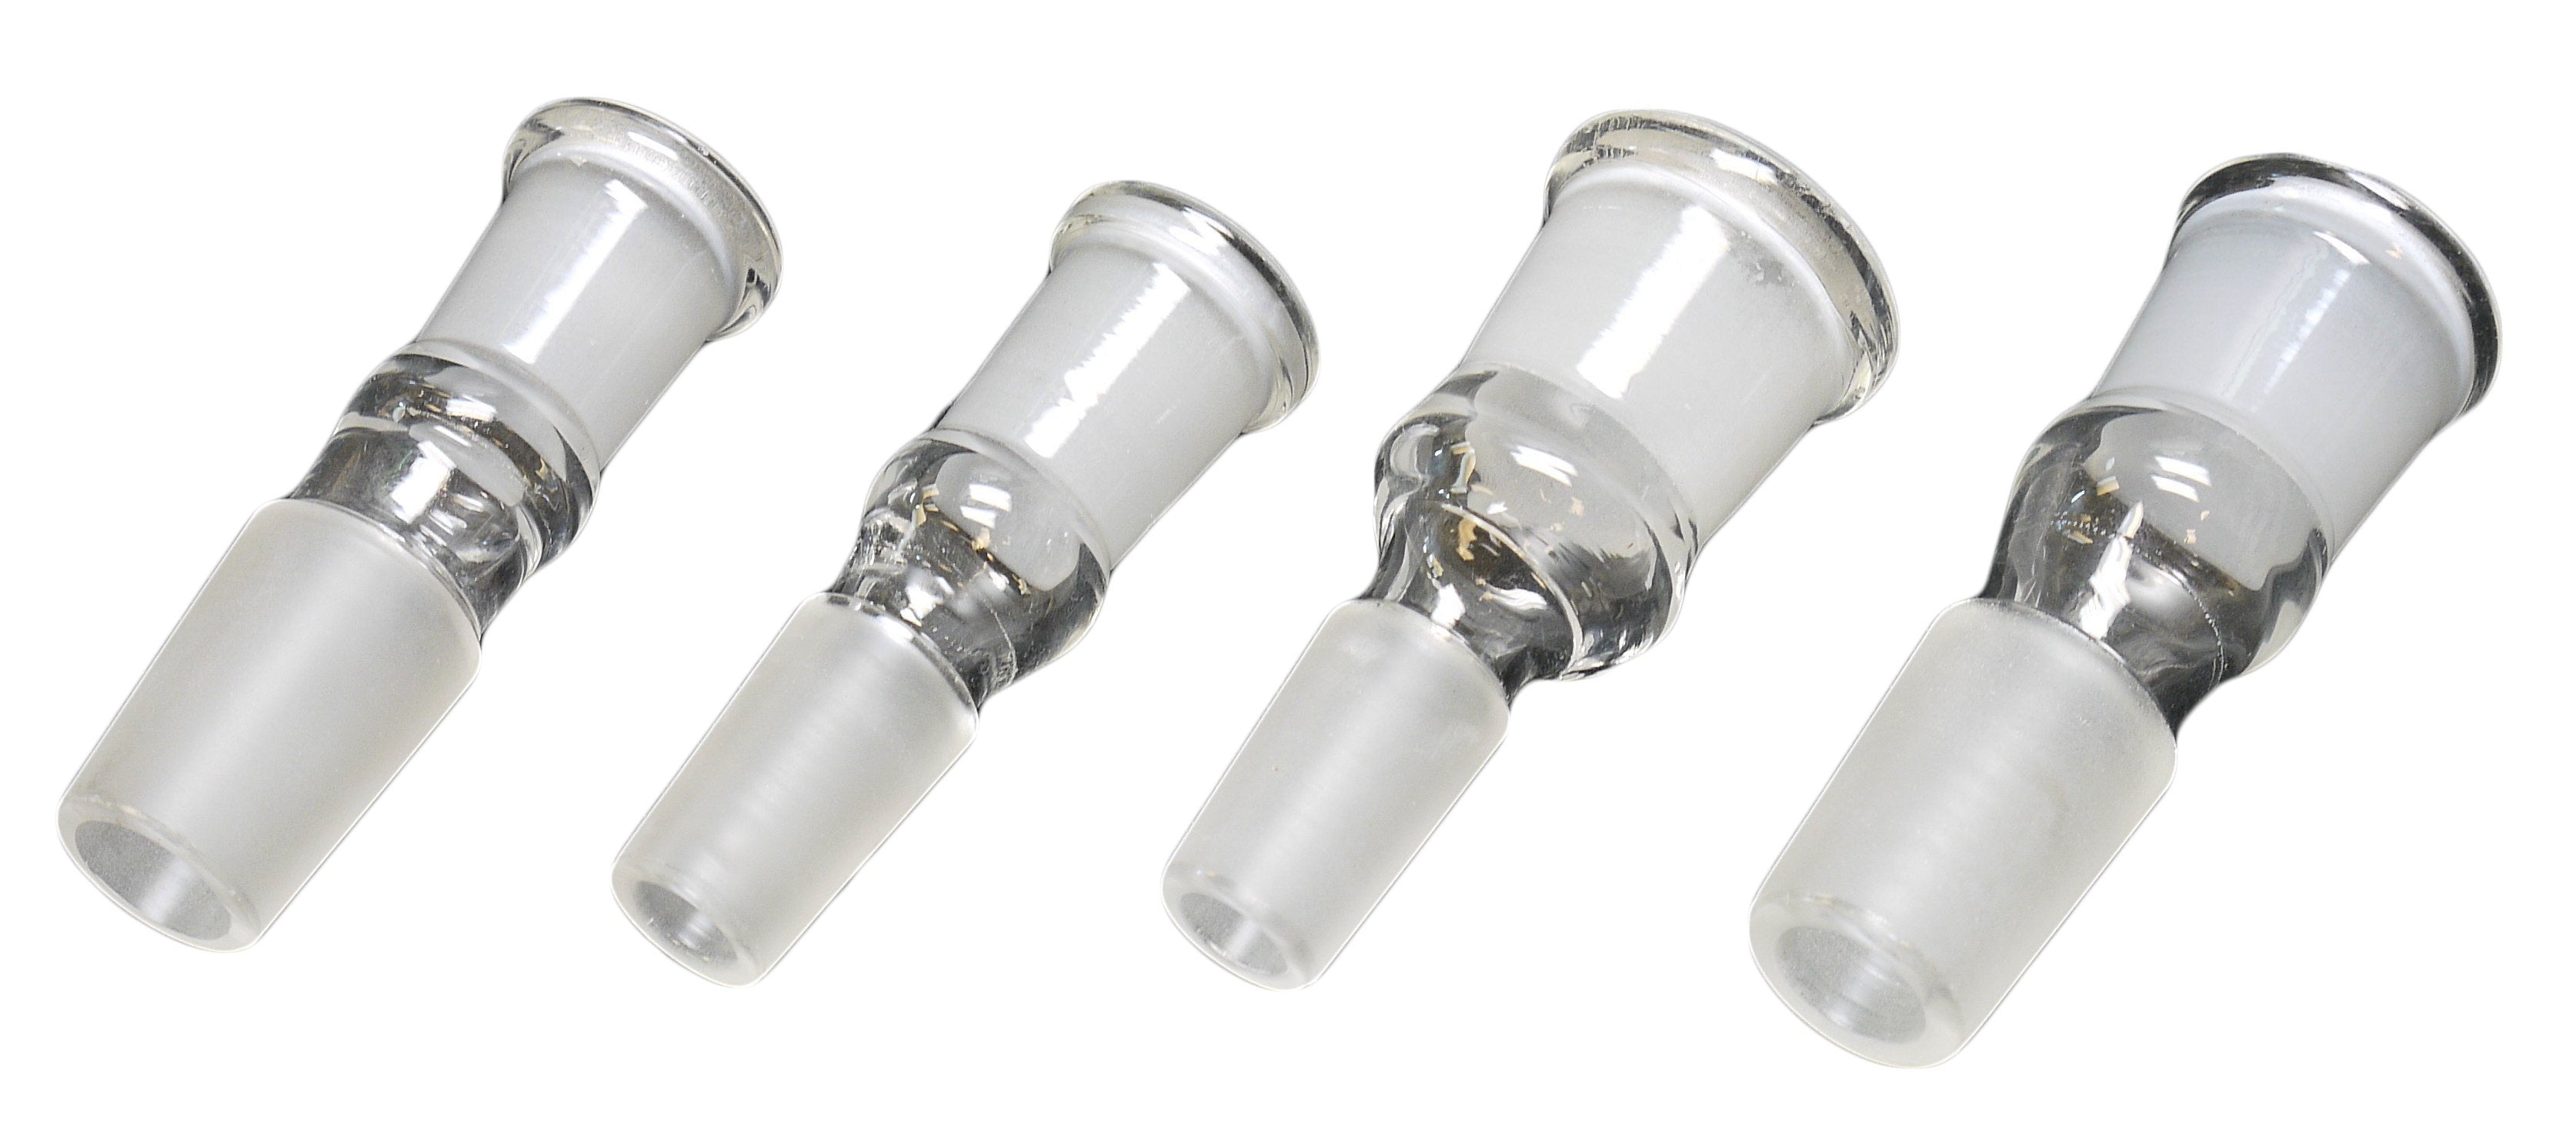 Male to Female connector 19mm to 14mm